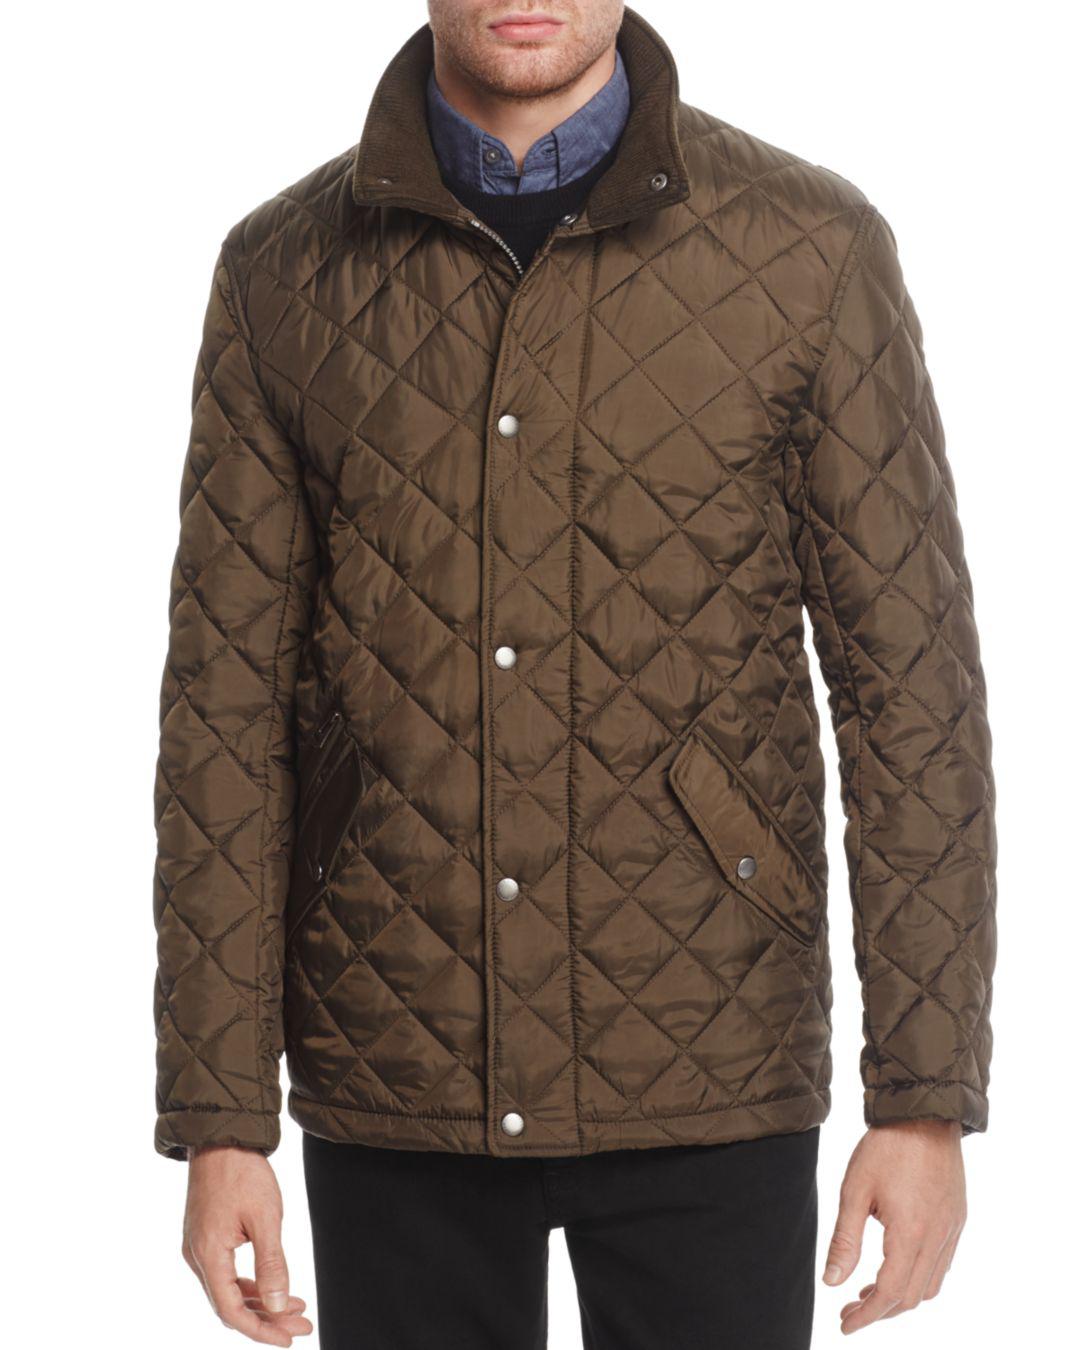 Lyst - Cole Haan Diamond Quilted Snap Jacket in Green for Men - Save 30 ...